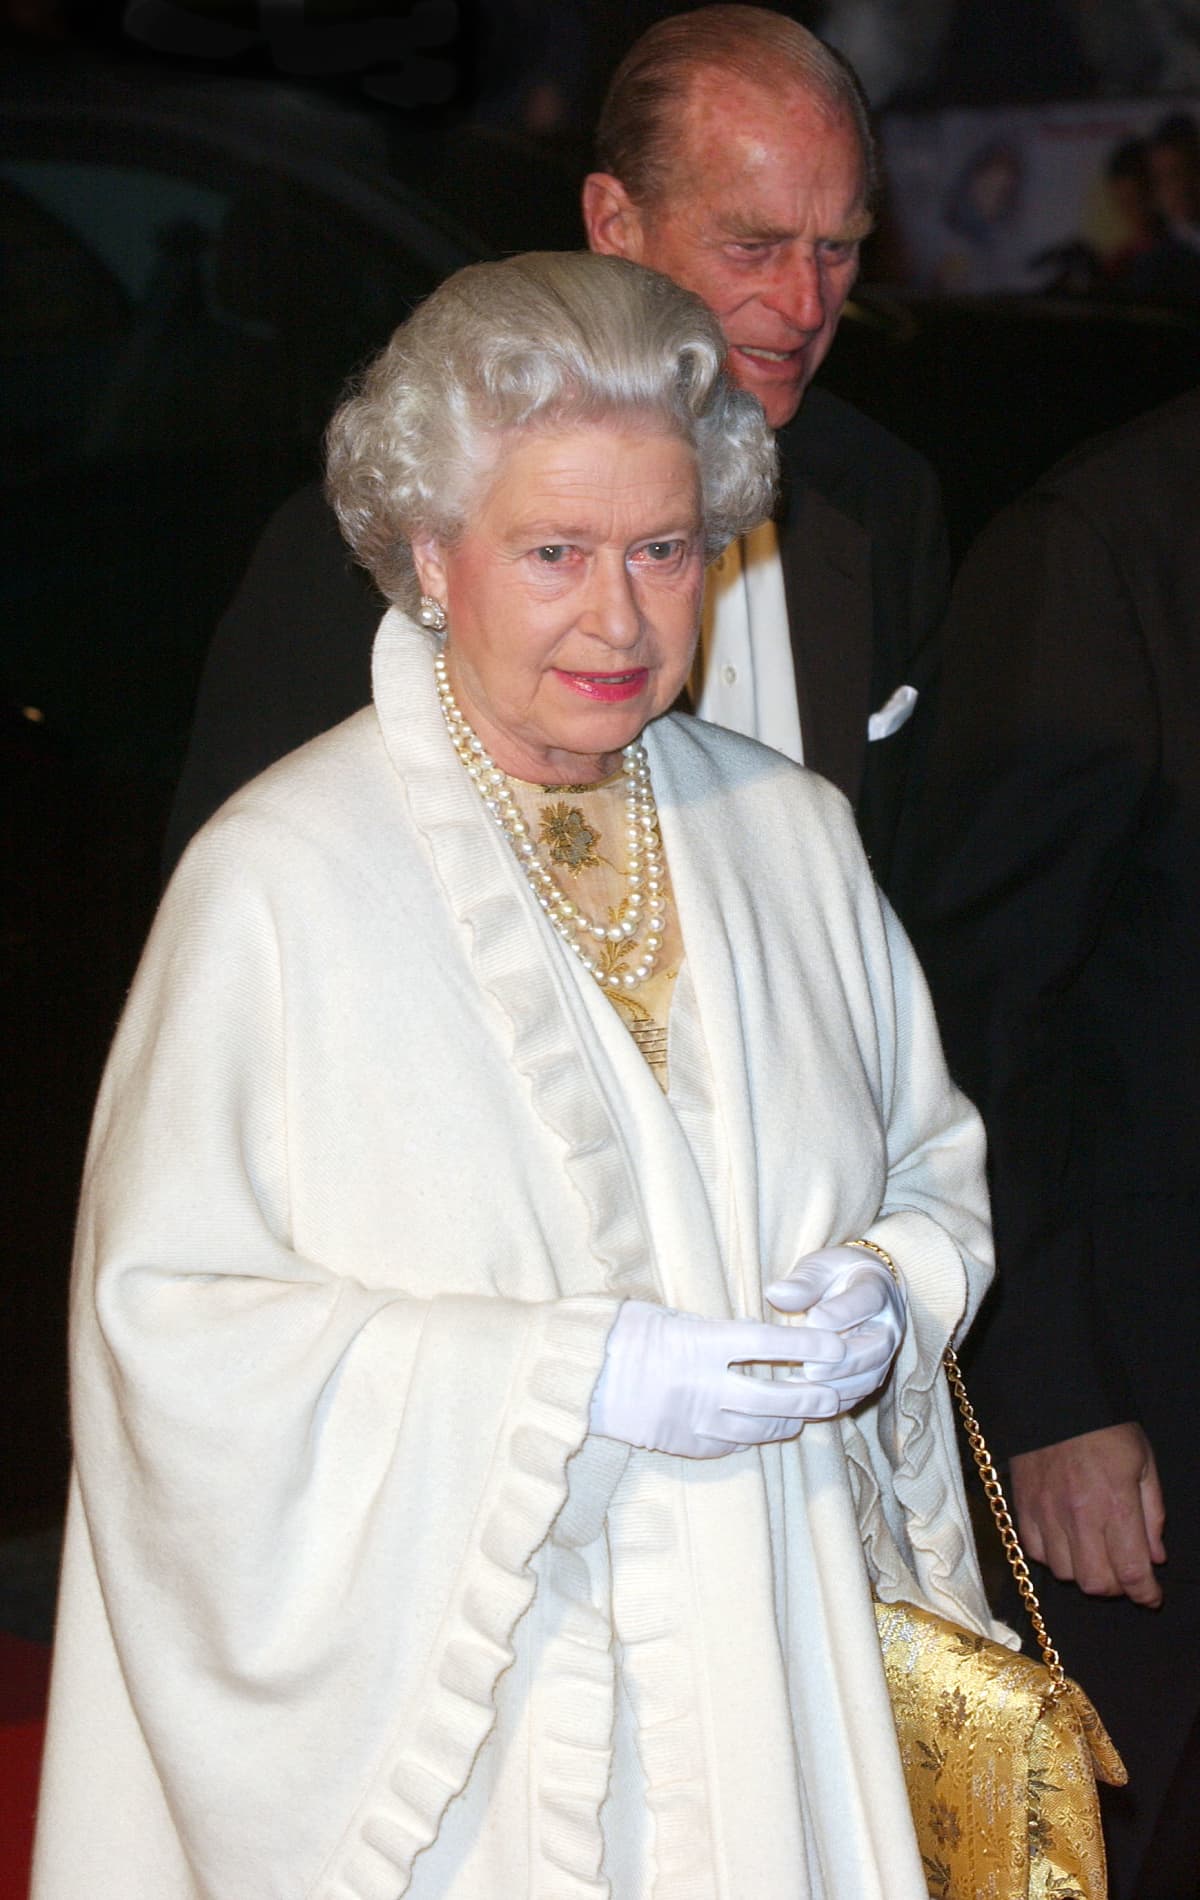 The Queen Attends The James Bond "Die Another Day" Royal World Premiere At London'S Royal Albert Hall. (Photo by Mark Cuthbert/UK Press via Getty Images)